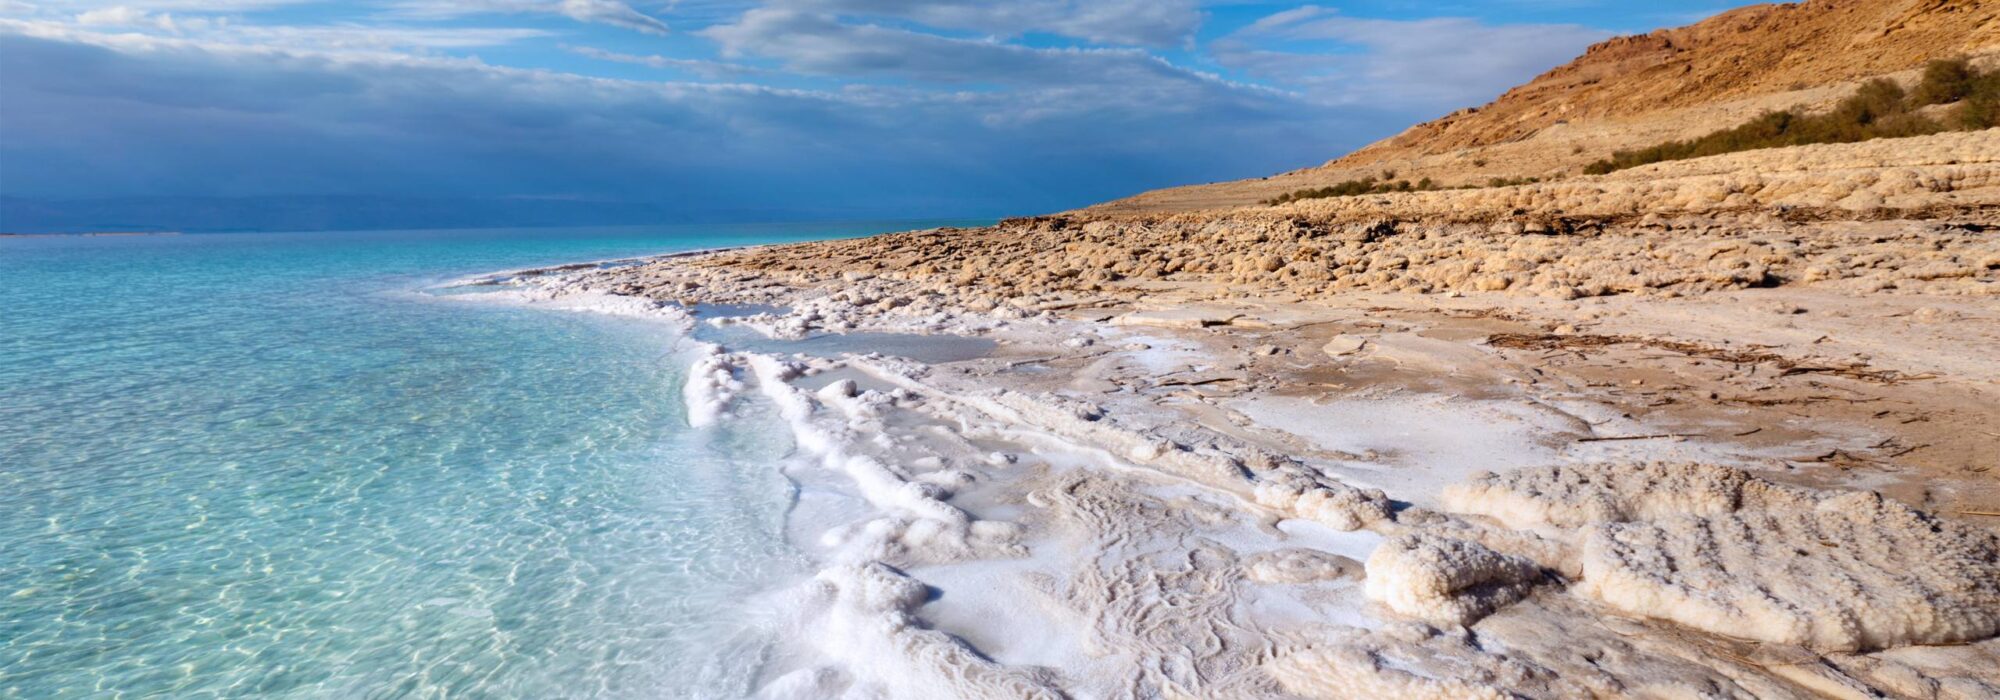 Dead Sea travel agents packages deals